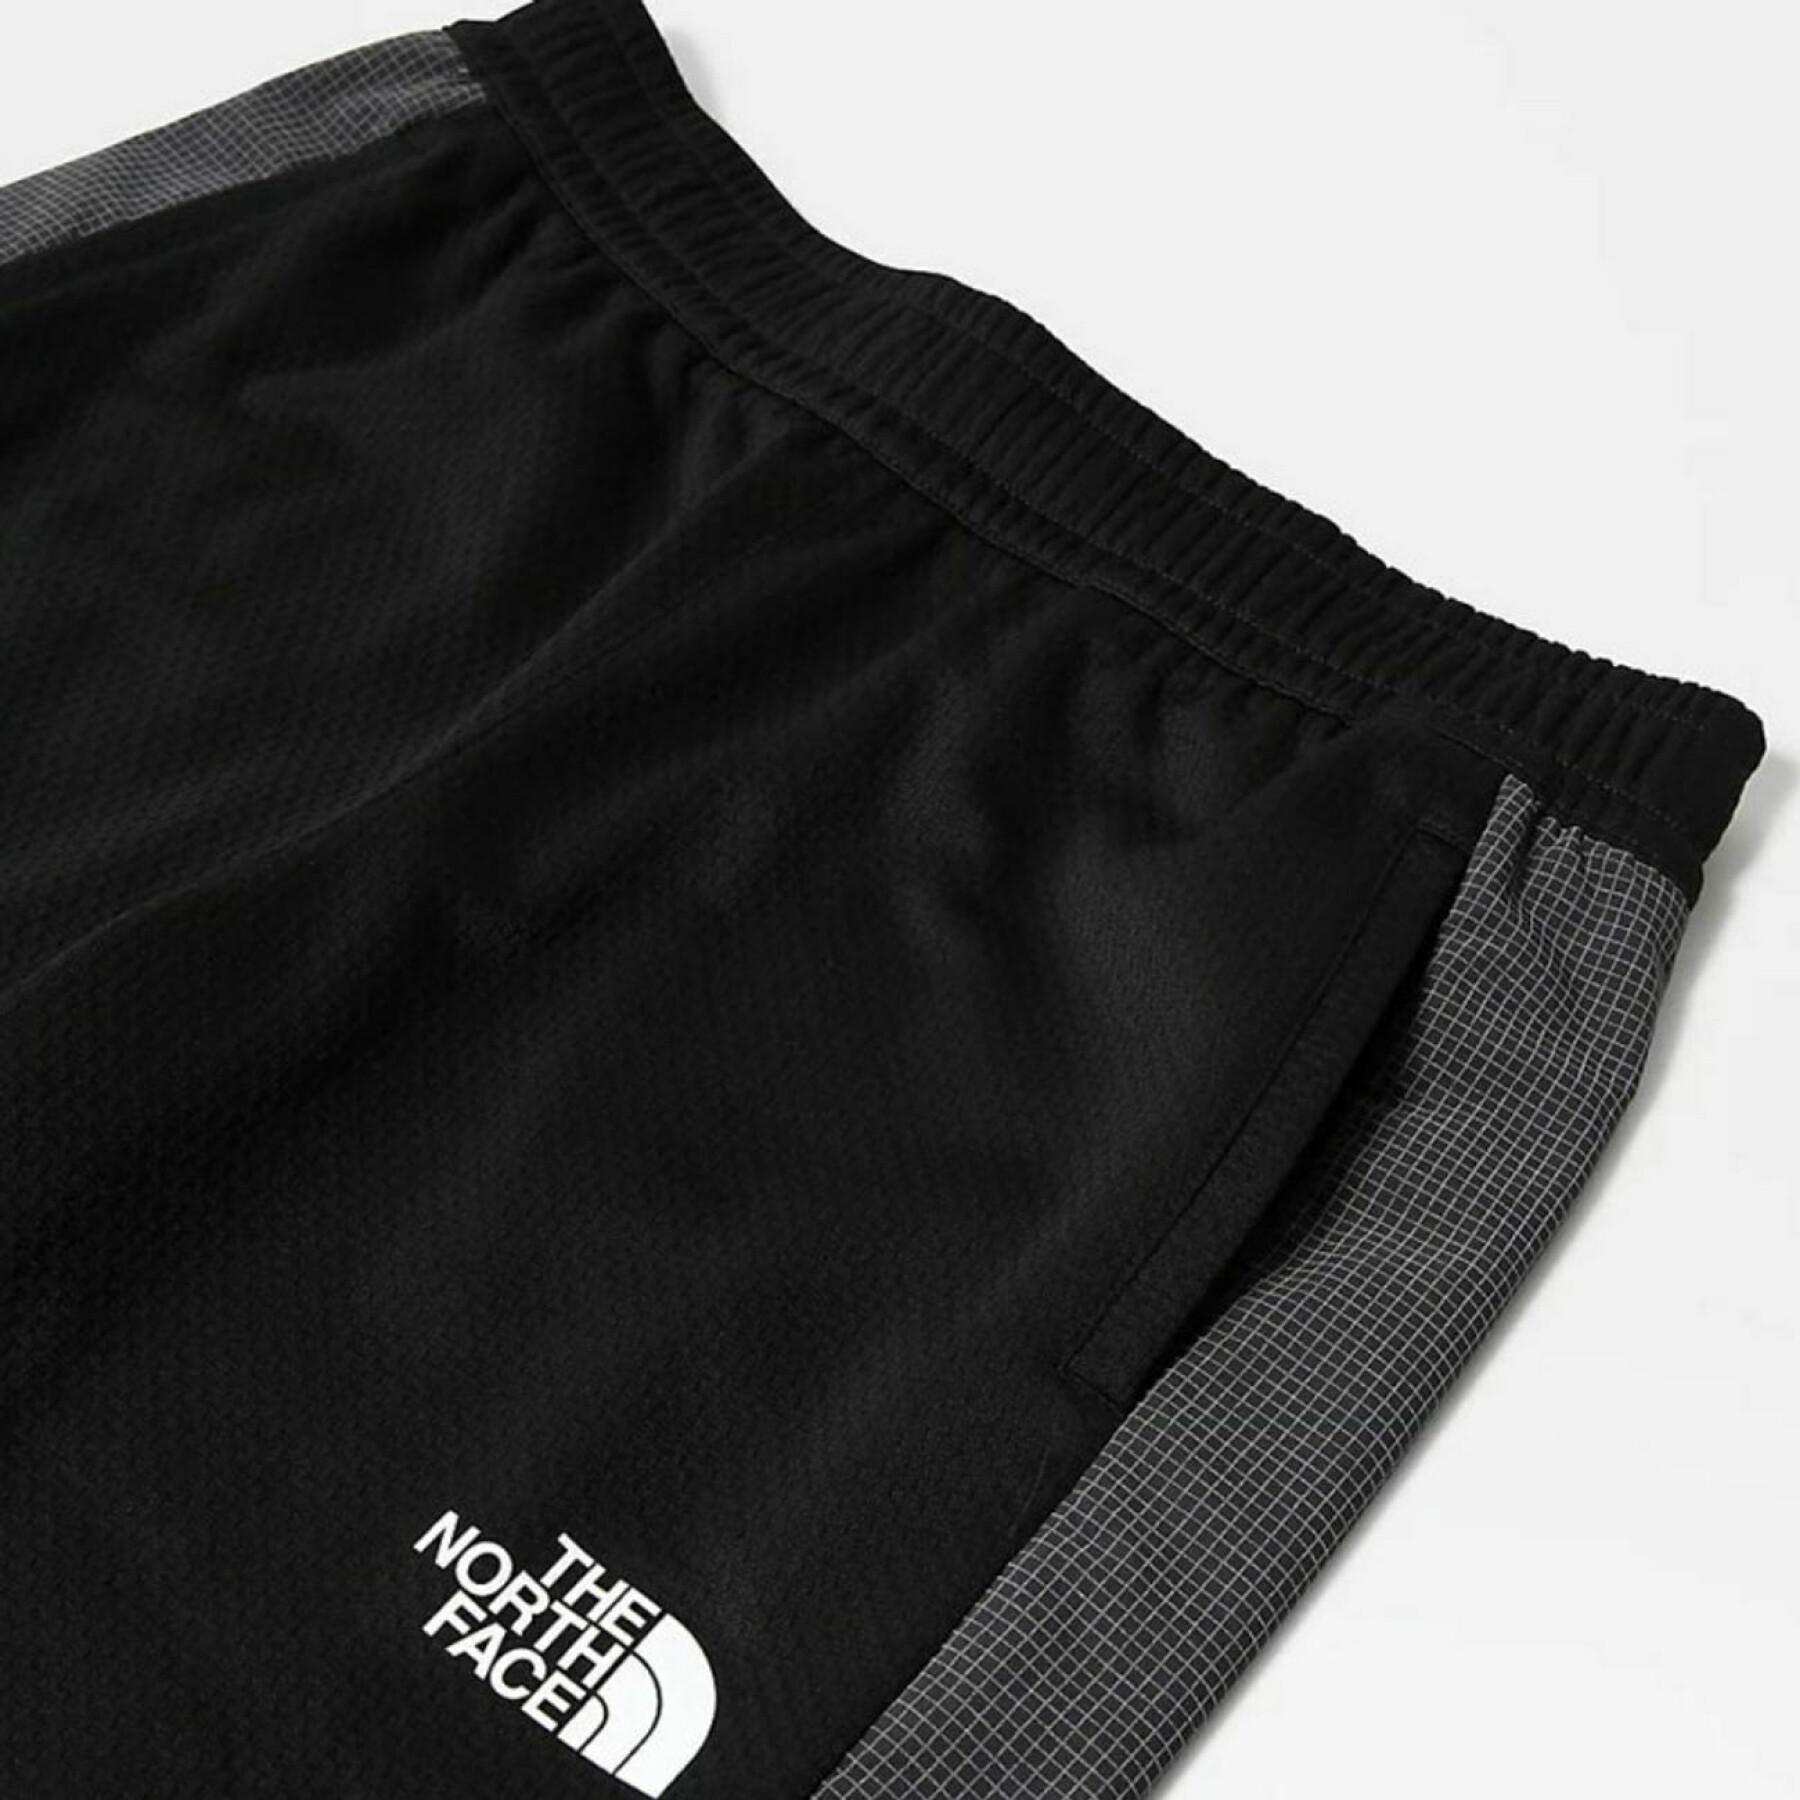 Pants The North Face Ma